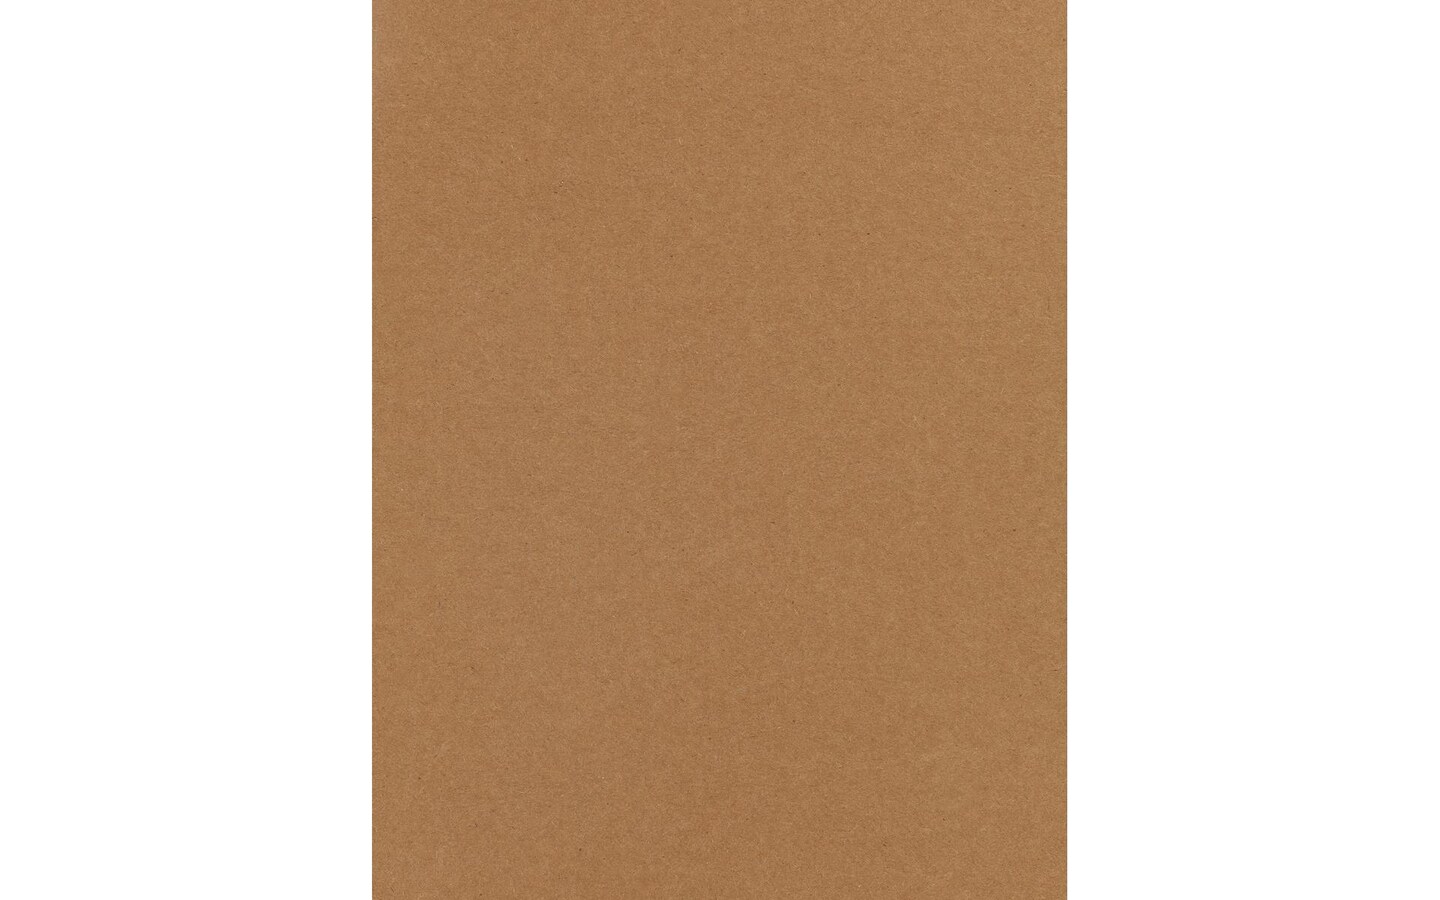 PA Paper Accents Smooth Cardstock 8.5 x 11 Kraft, 65lb colored